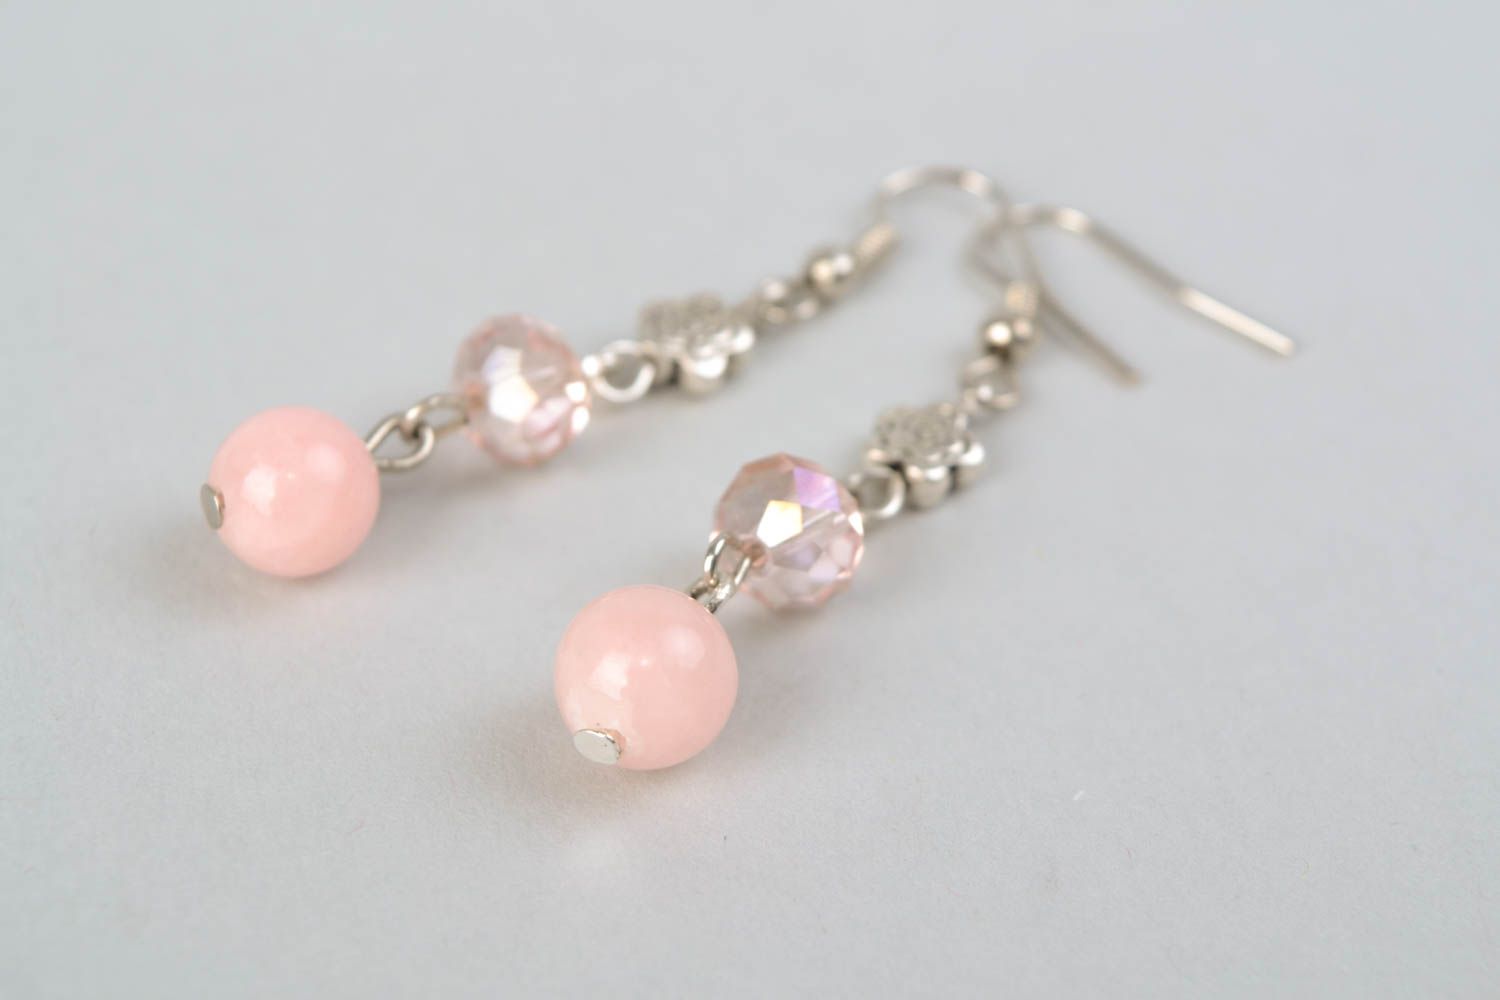 Metal earrings with pink quartz beads photo 3